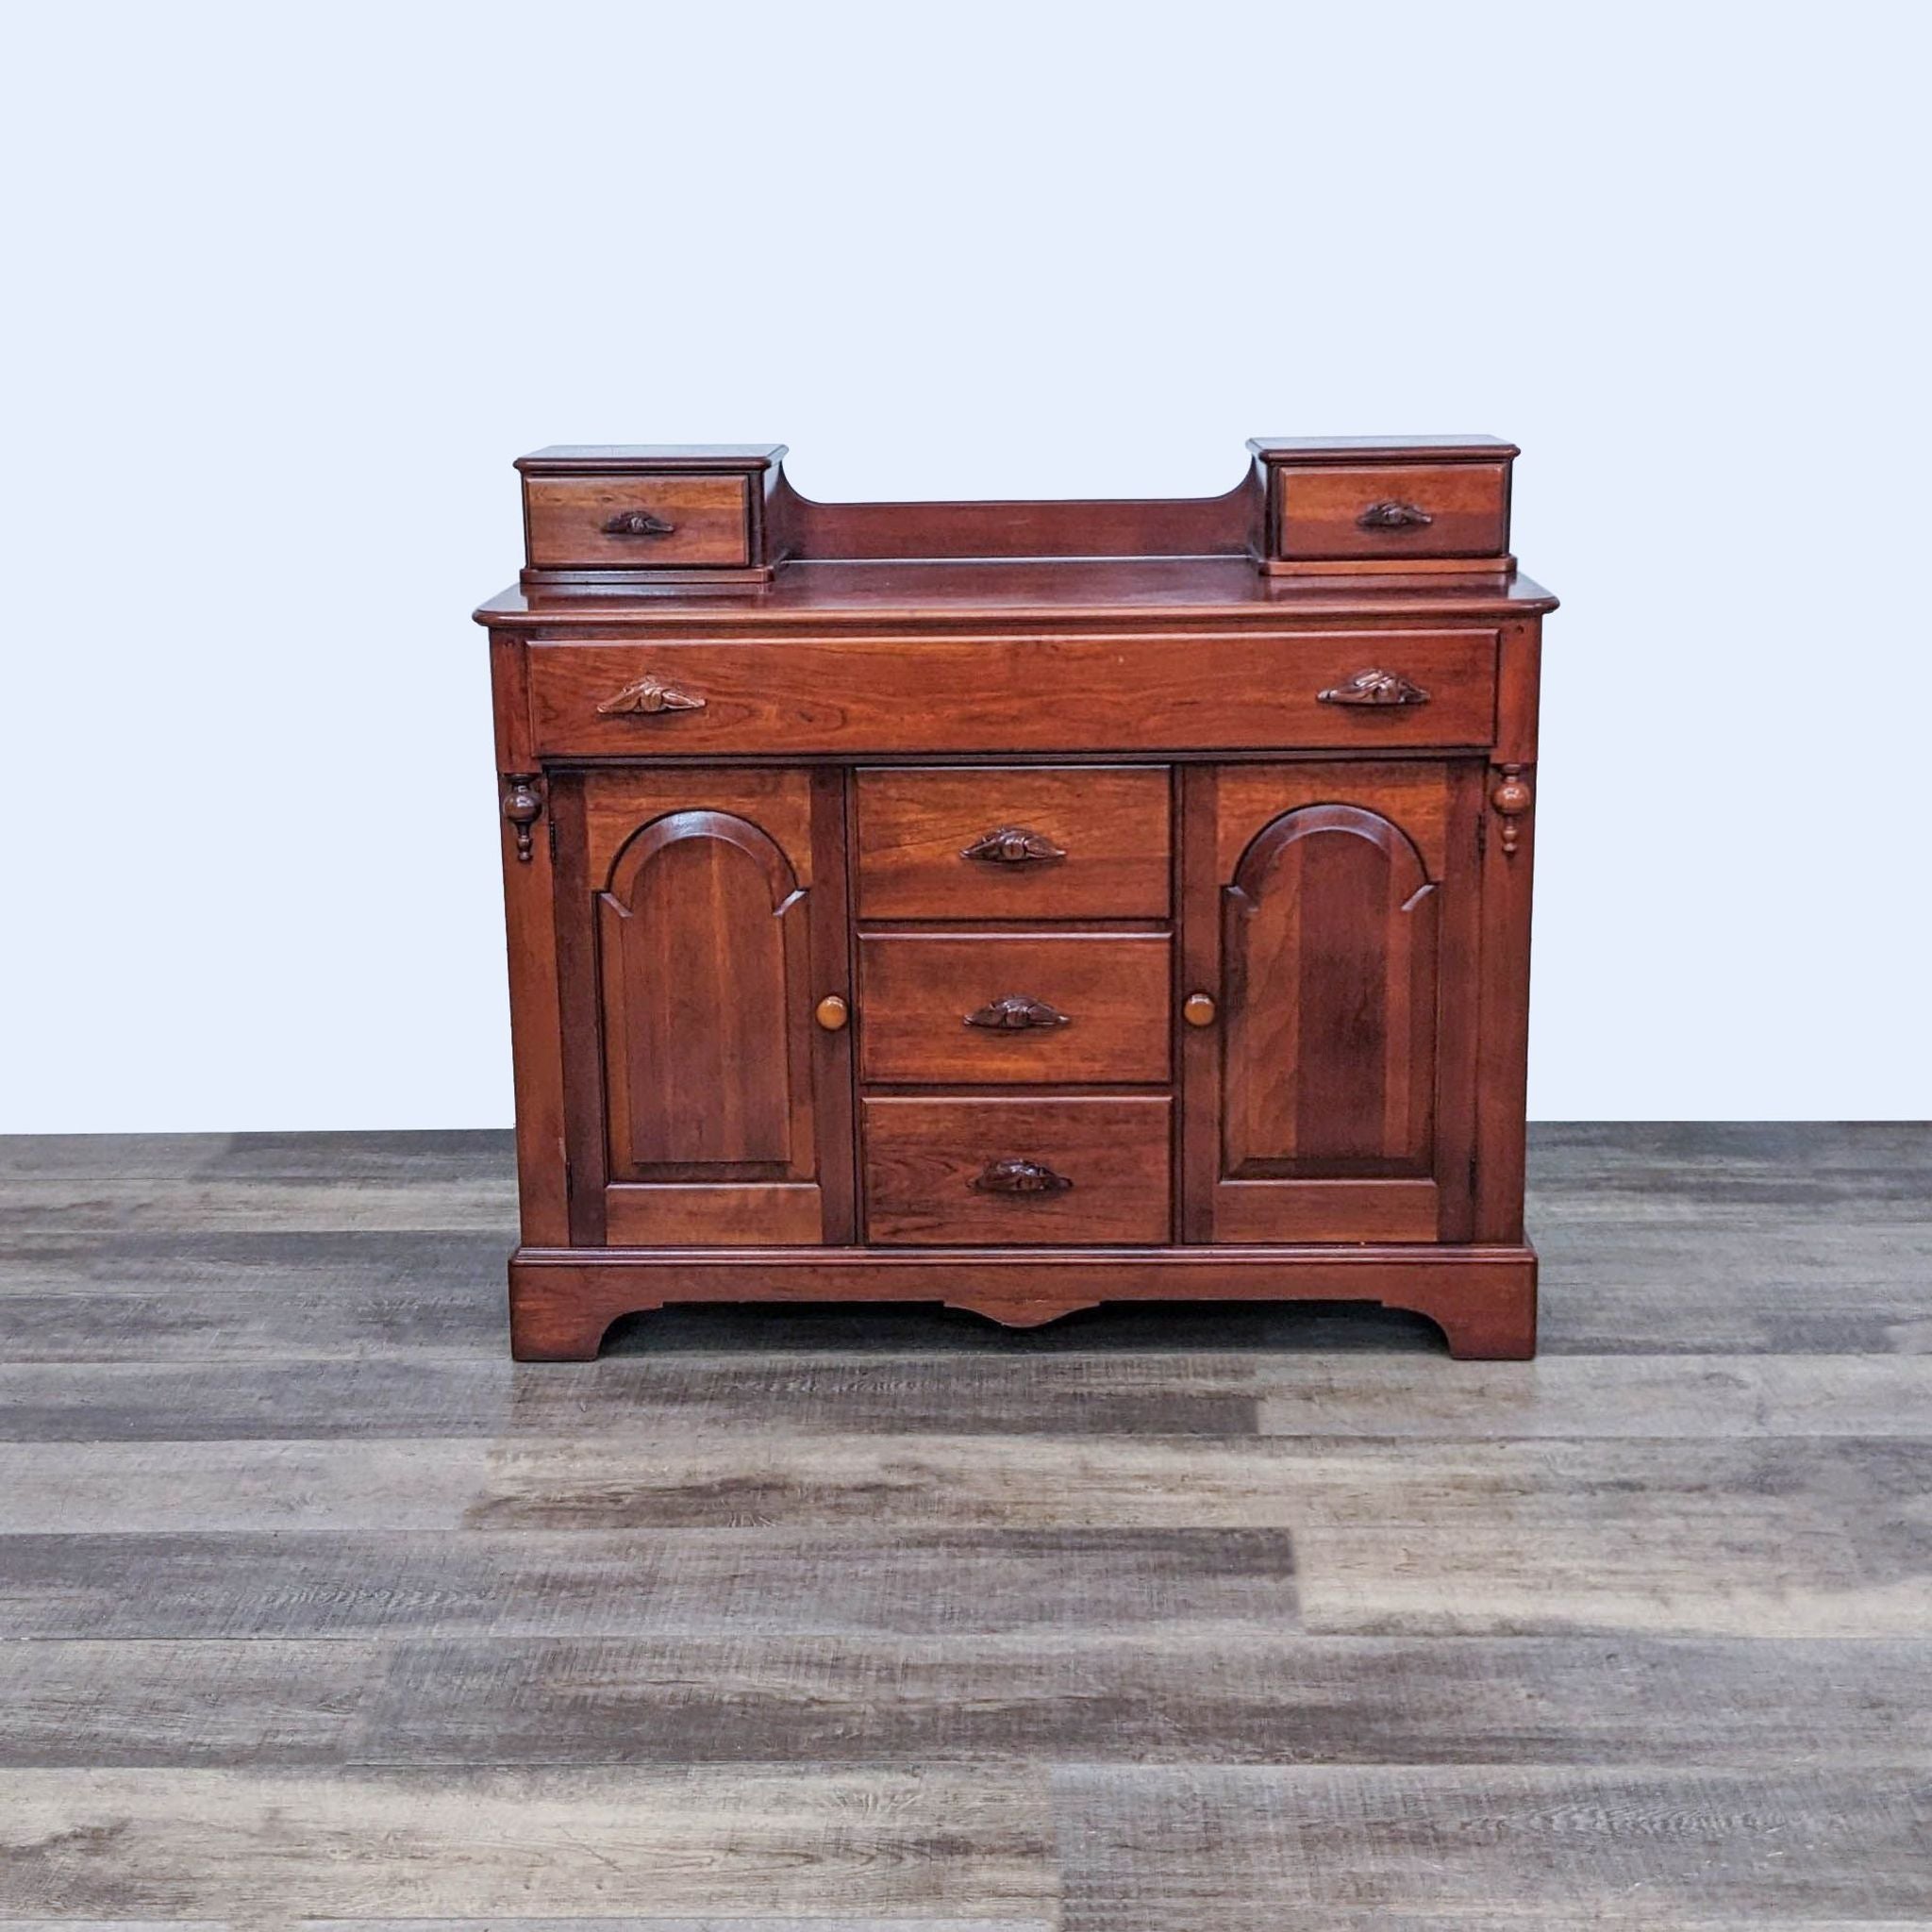 Victorian-style Reperch sideboard with two upper drawers, three centered lower drawers, and two arched cabinet doors, on a wooden floor.